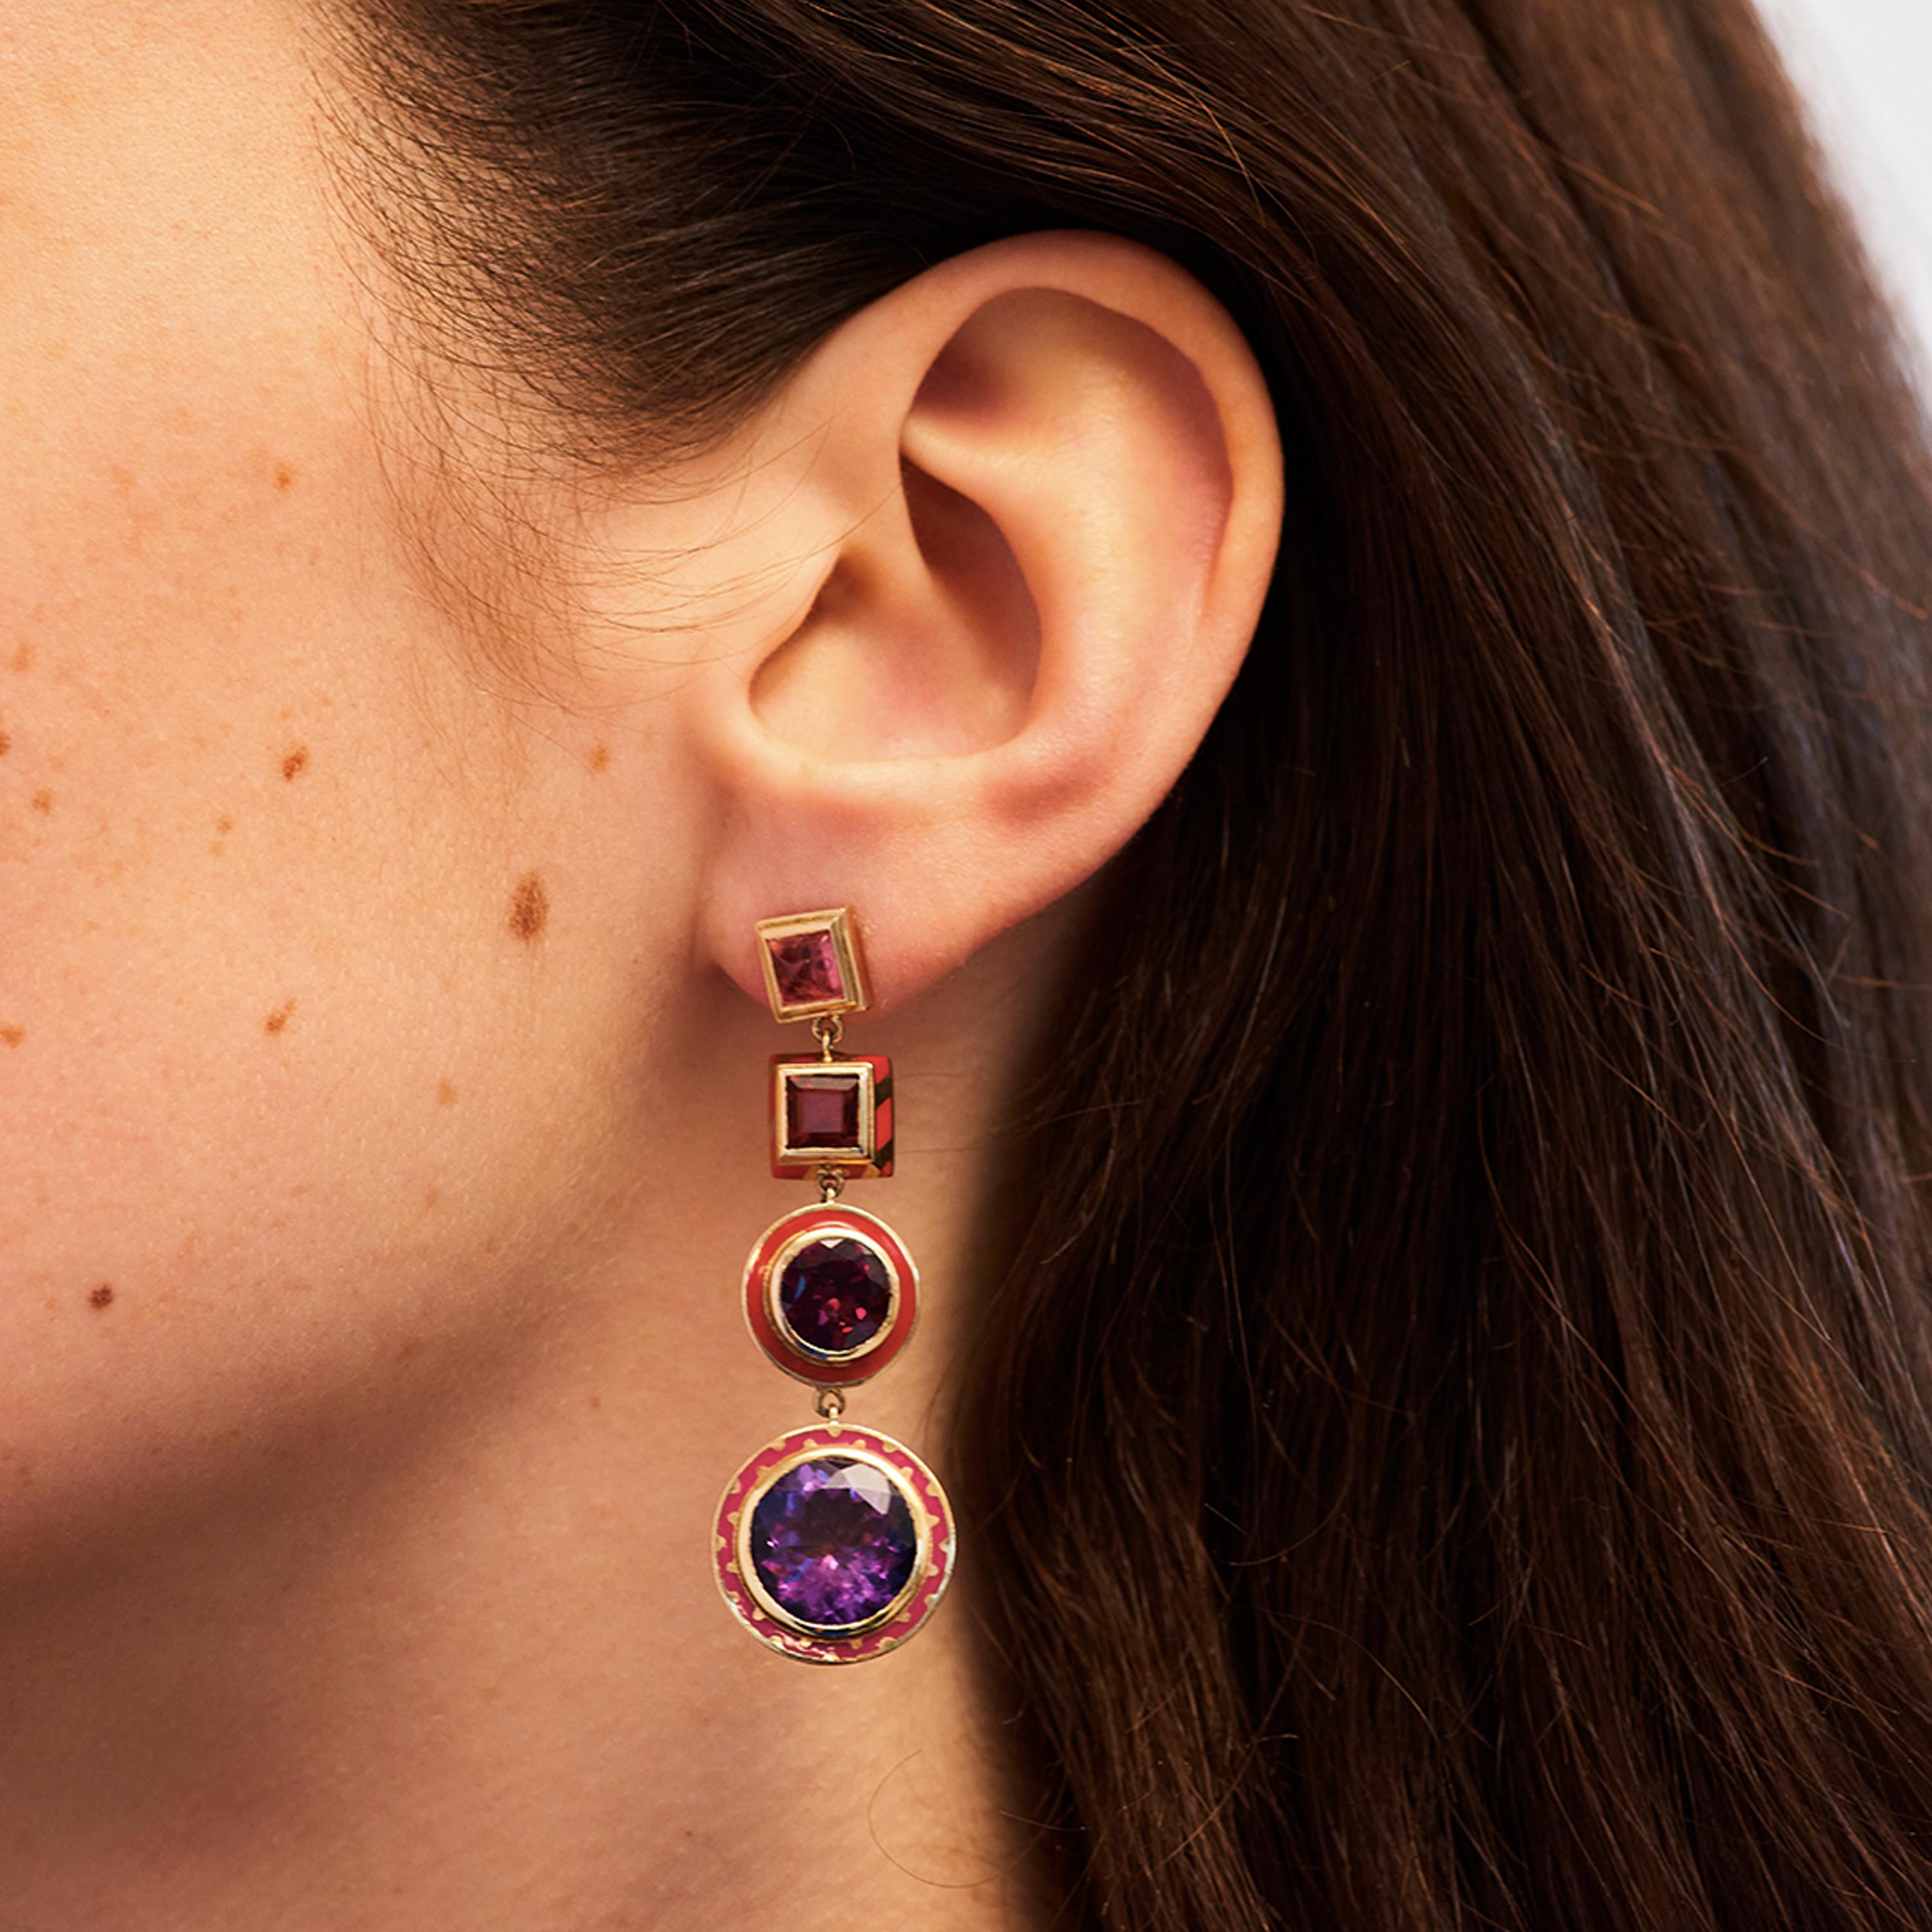 Alice Cicolini’s Candy Lacquer Chandelier Earrings feature rhodolite garnets, alongside pink tourmaline sugarloaf, madeira citrines princess, rhodolite garnet and amethyst rounds set in 14 karat yellow gold with lacquer enamel. 

Taking inspiration